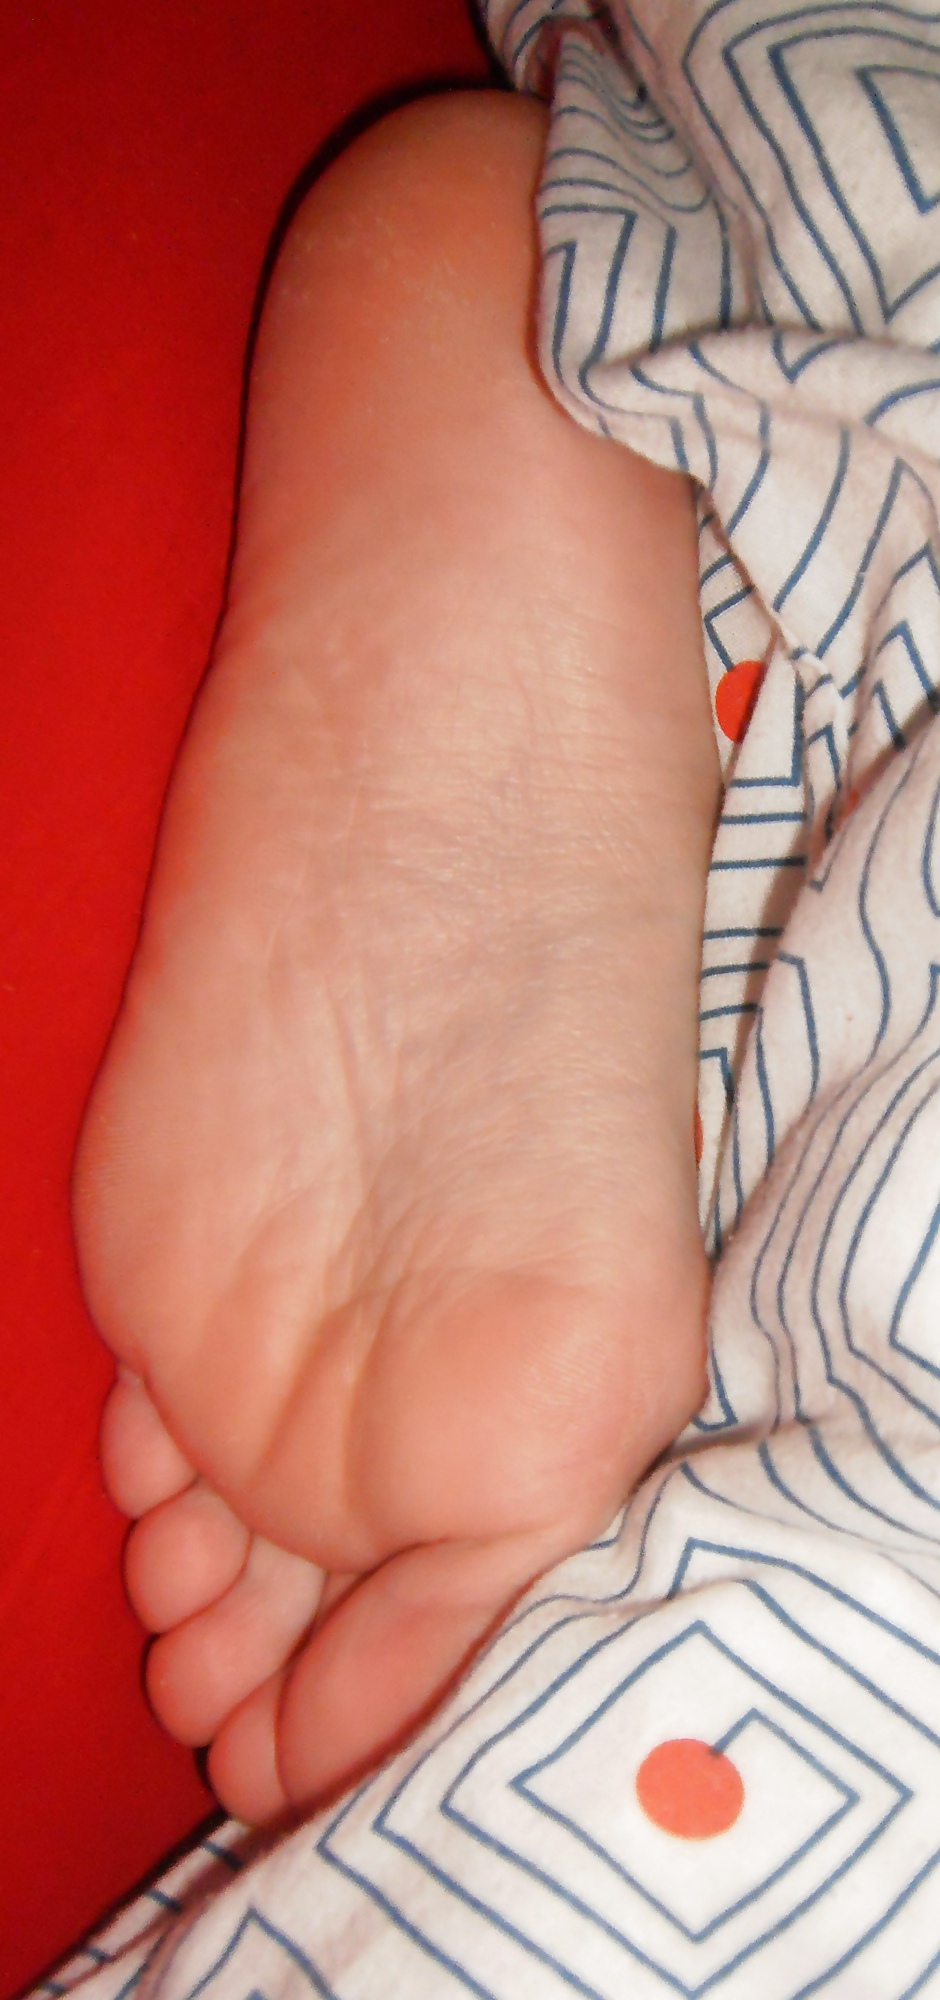 BB 's Feet 2012 - Foot Model with long toes, slender feet porn pictures